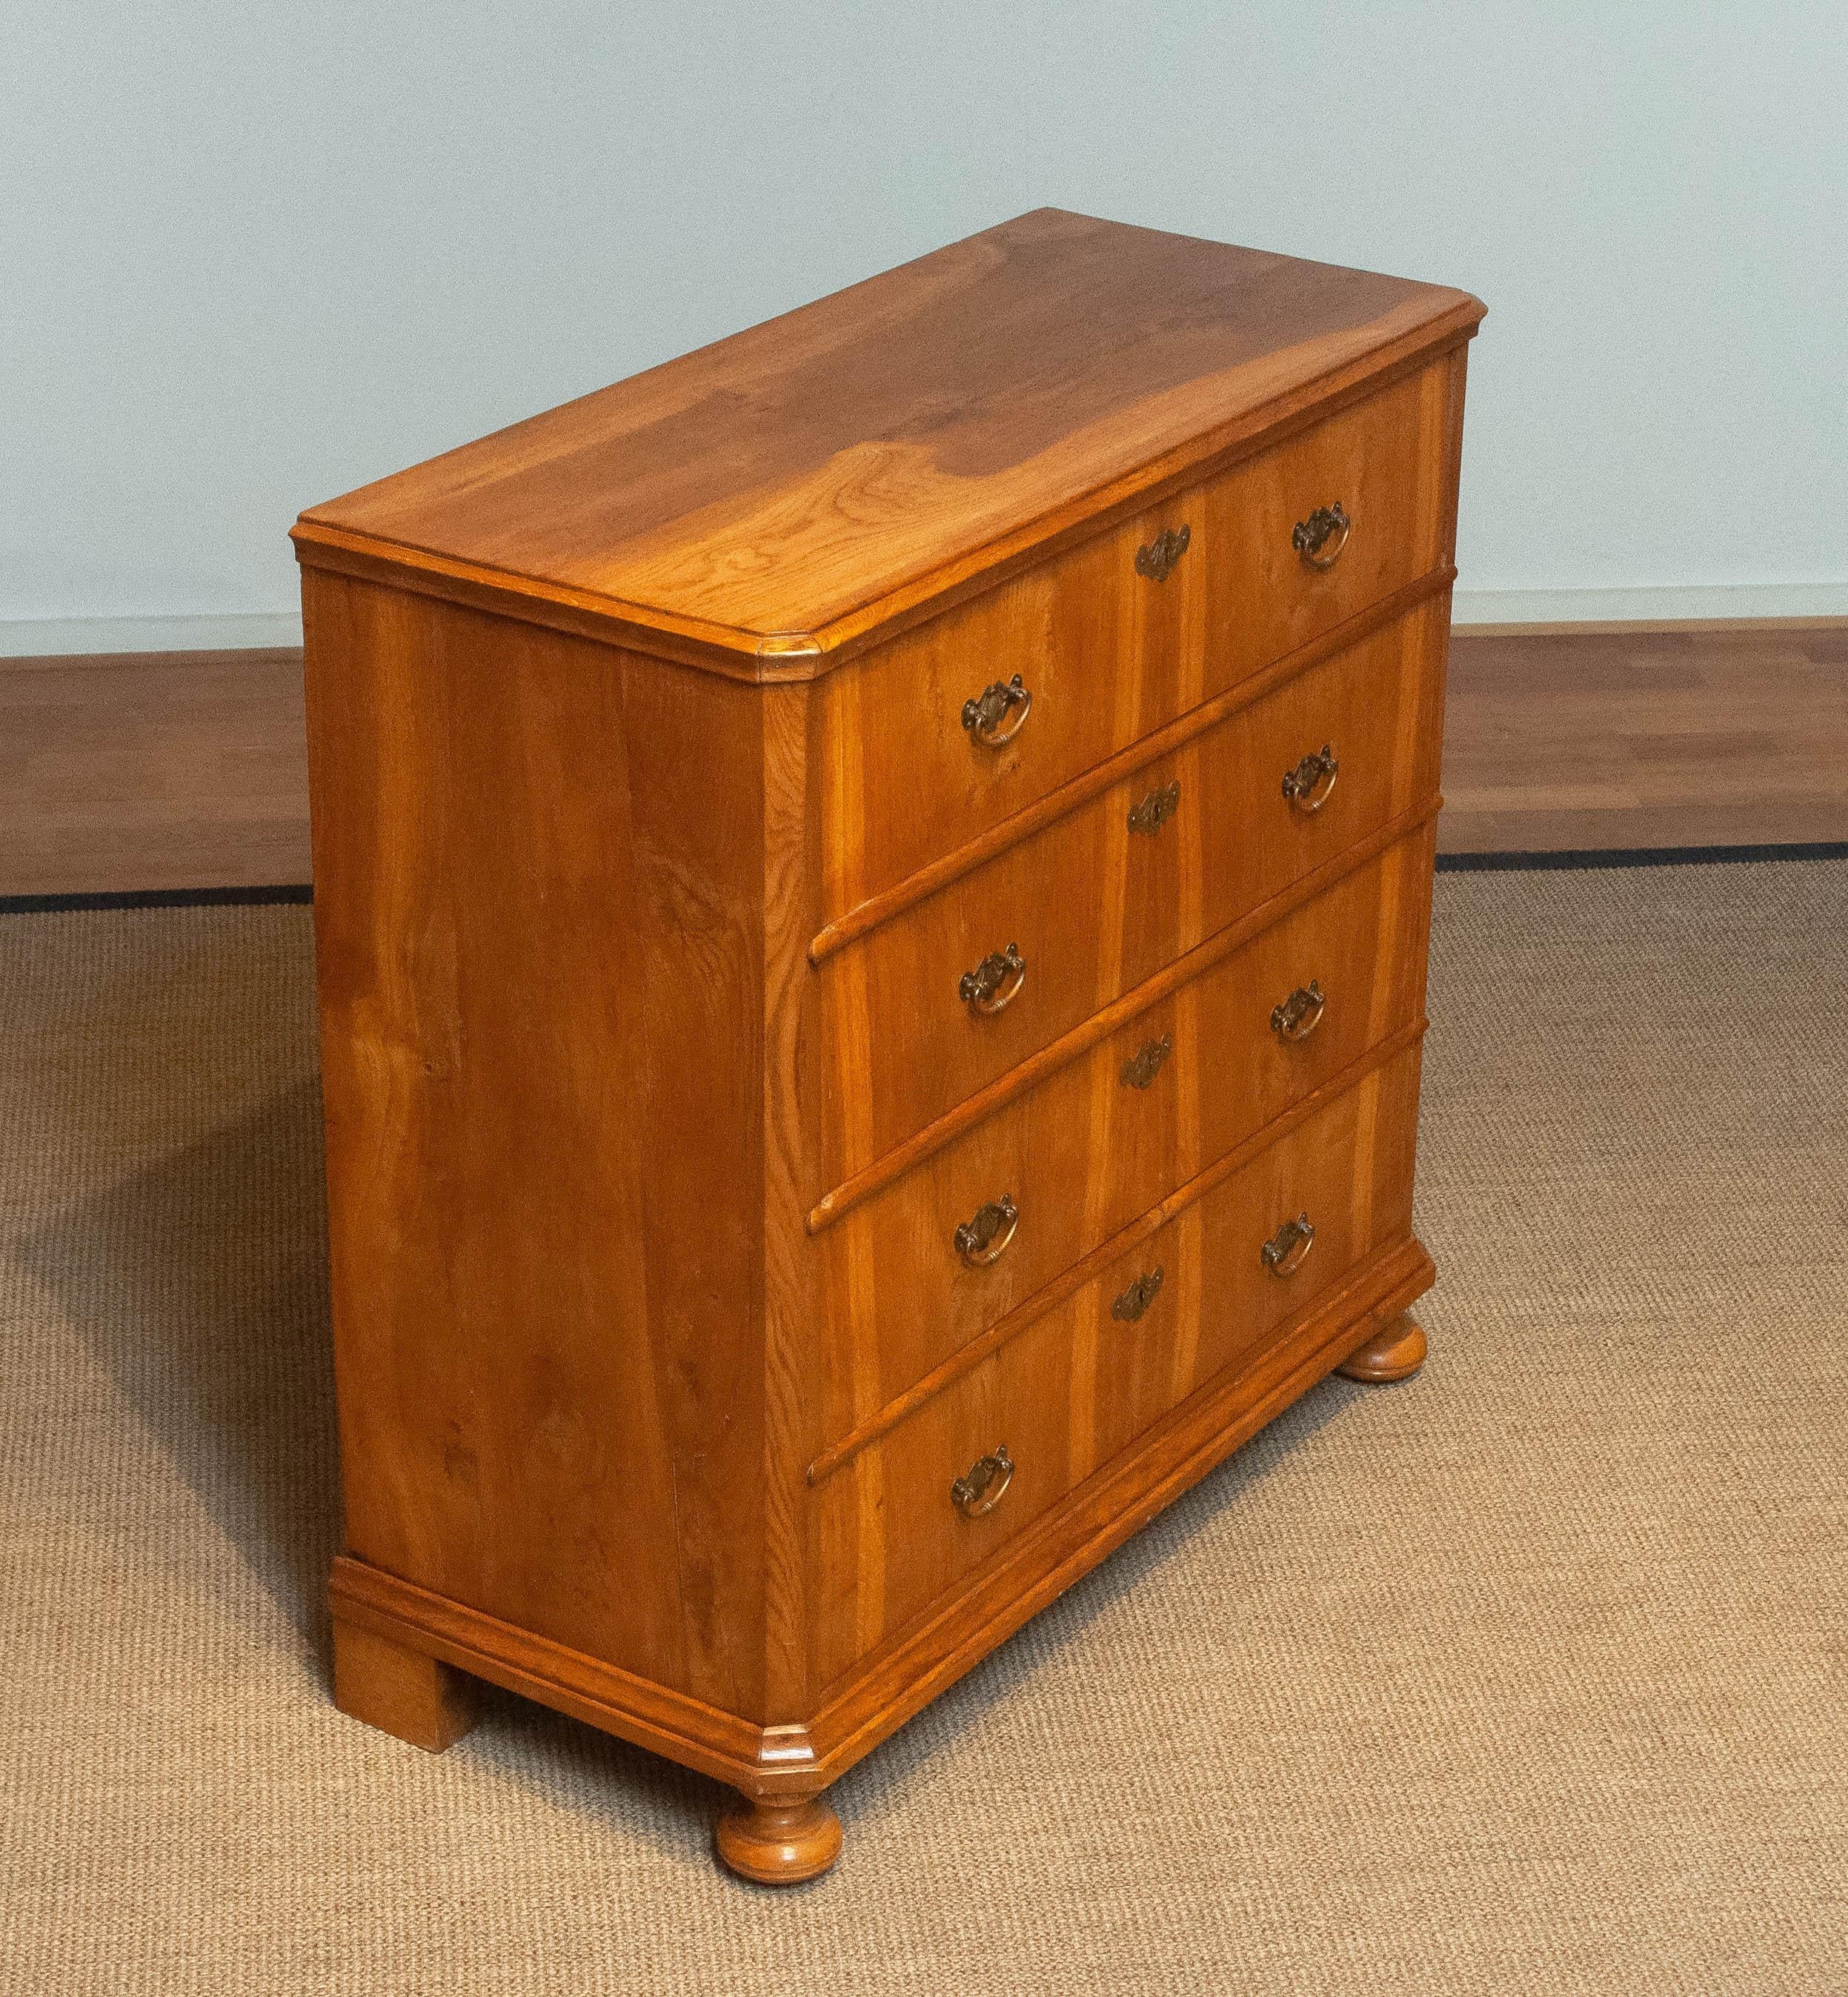 18th Century Biedermeier Commode / Drawer Cabinet with Book Matching Oak Drawers In Good Condition For Sale In Silvolde, Gelderland